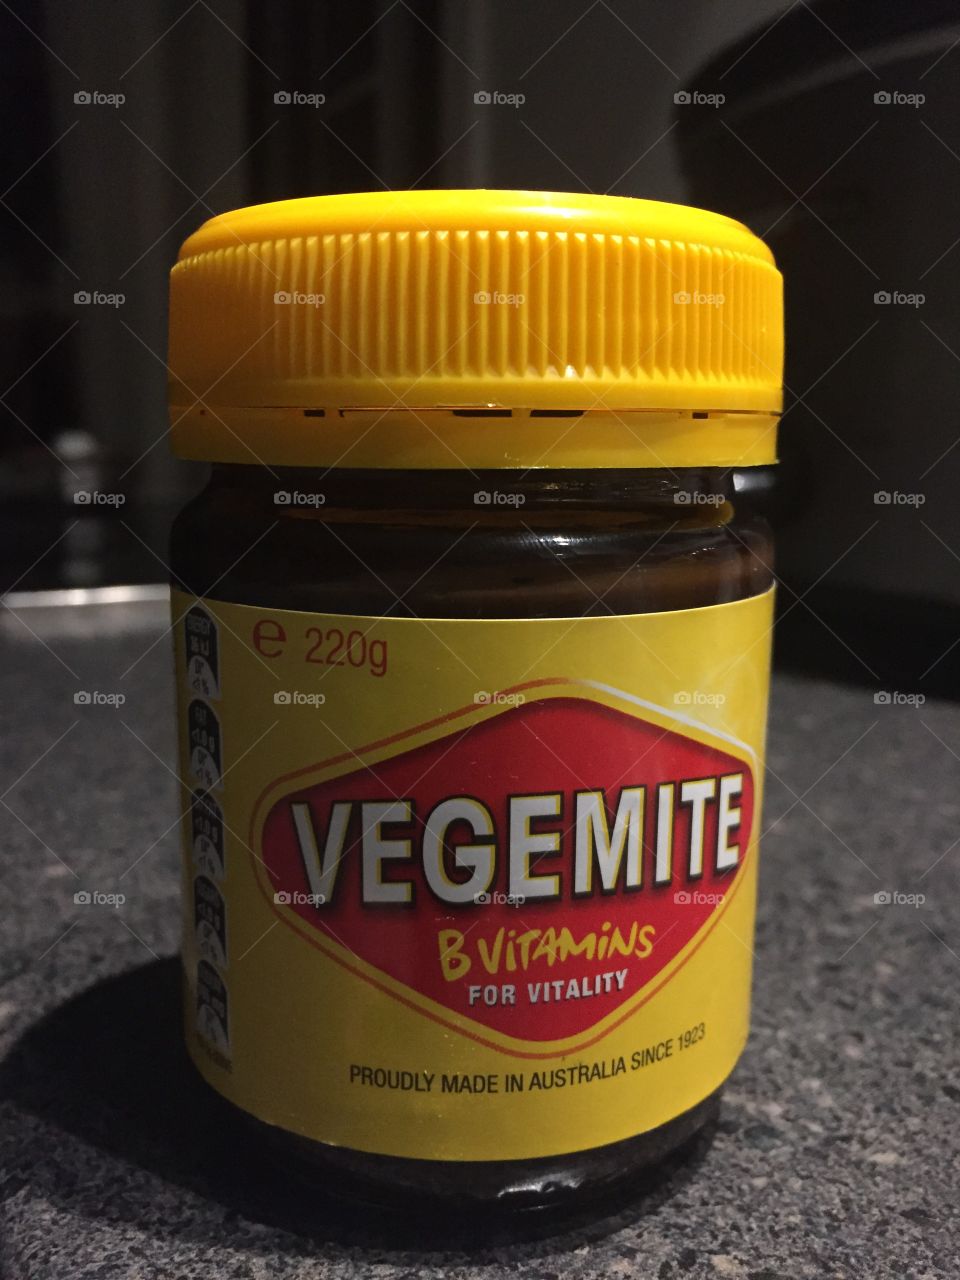 A pic for Peter.. this is Australia’s Vegemite